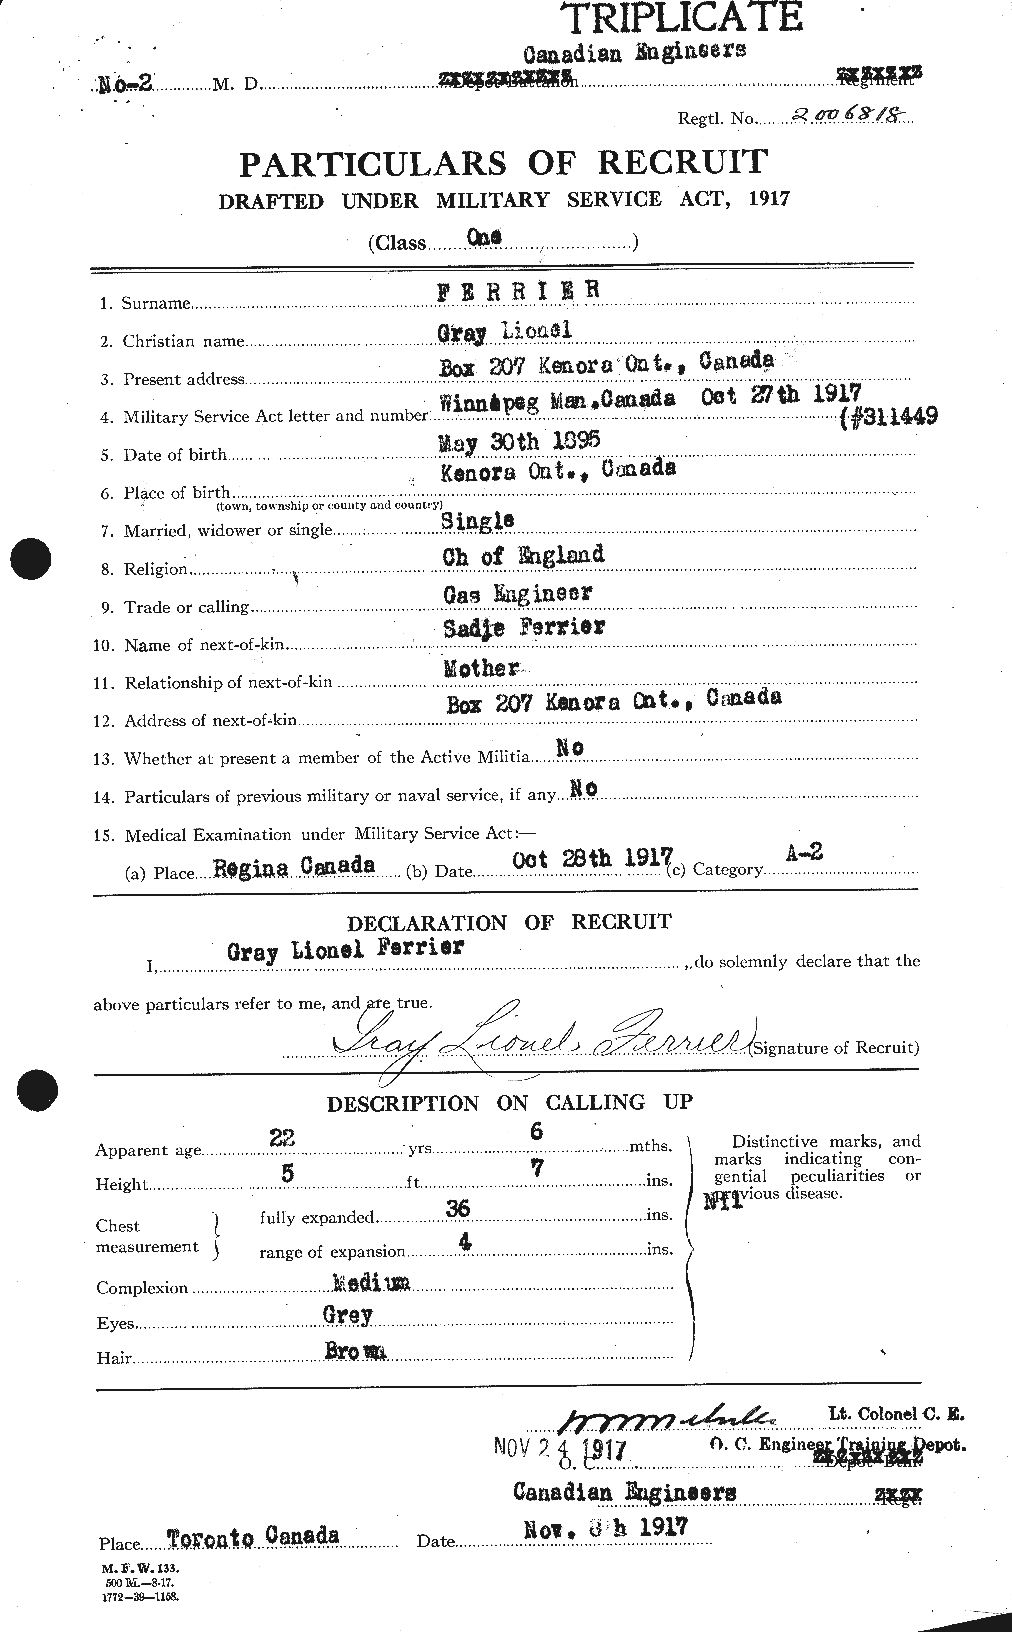 Personnel Records of the First World War - CEF 325094a